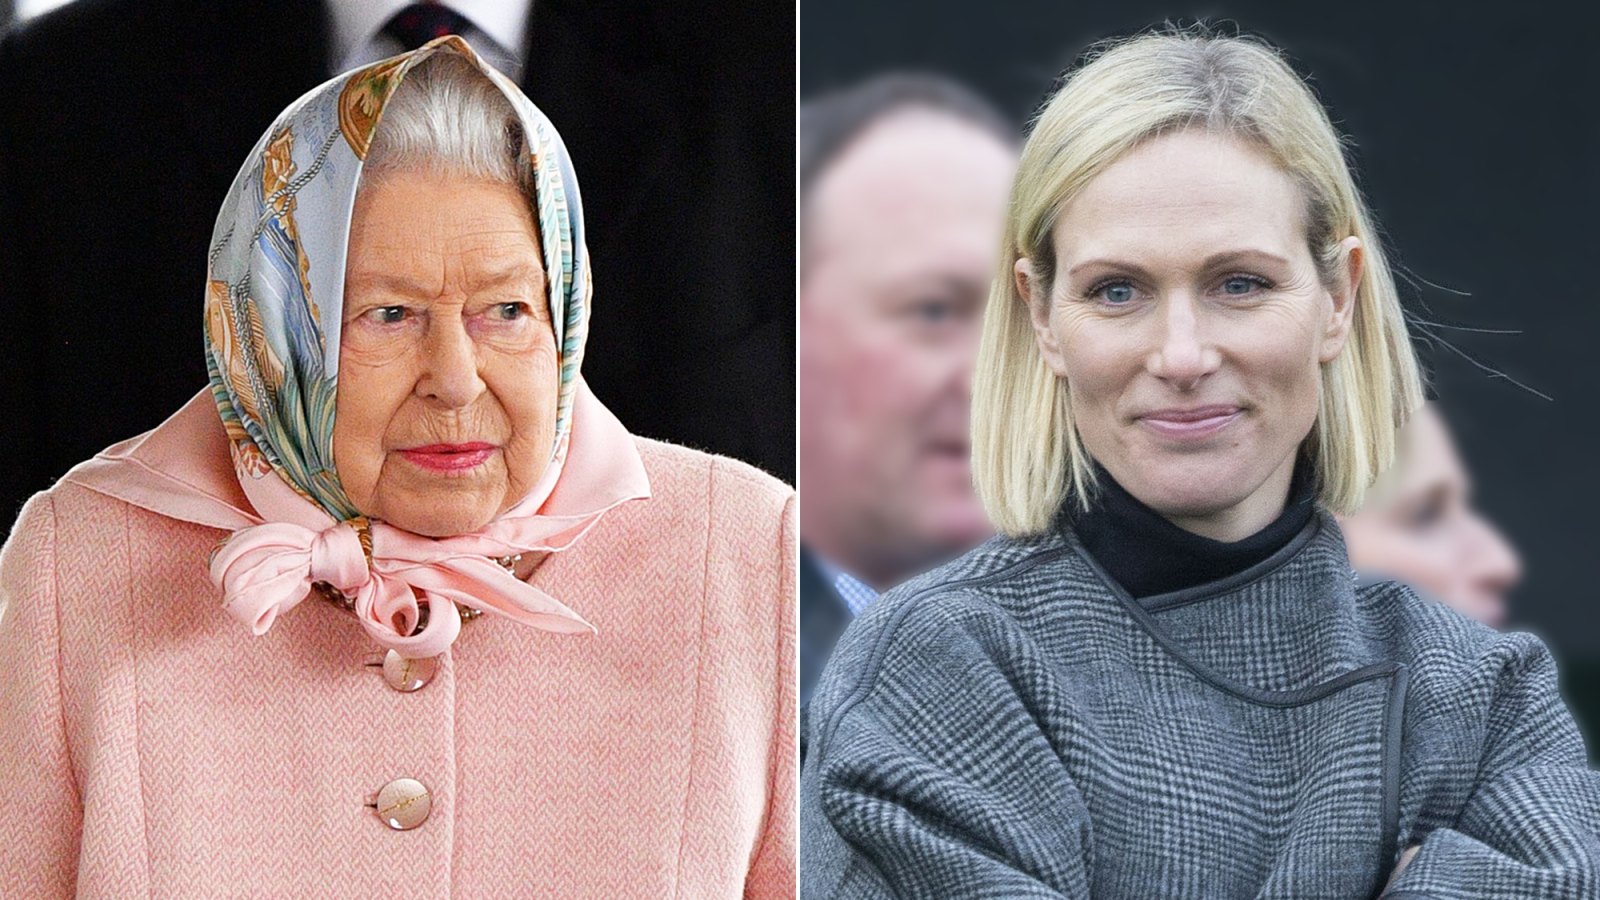 Queen Elizabeth II’s Granddaughter Zara Tindall Is Banned From Driving for 6 Months